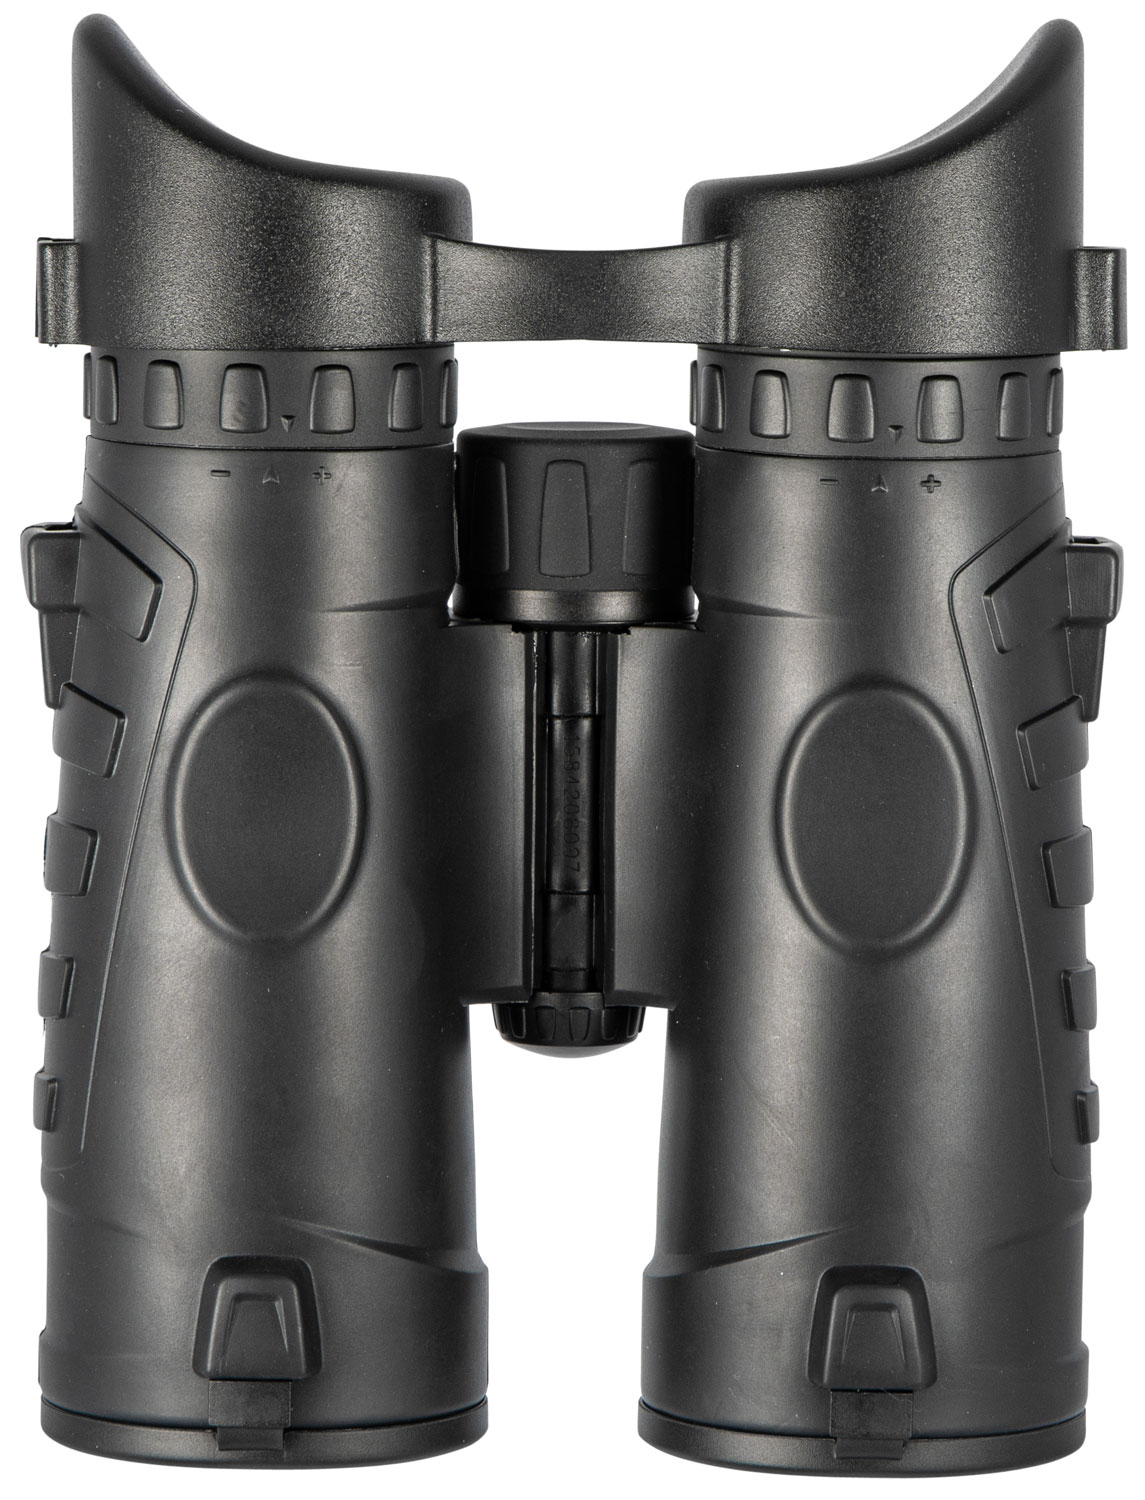 Steiner 2006 T1042r Tactical 10x42mm SUMR Military Ranging Reticle Roof Prism Black Rubber Armor